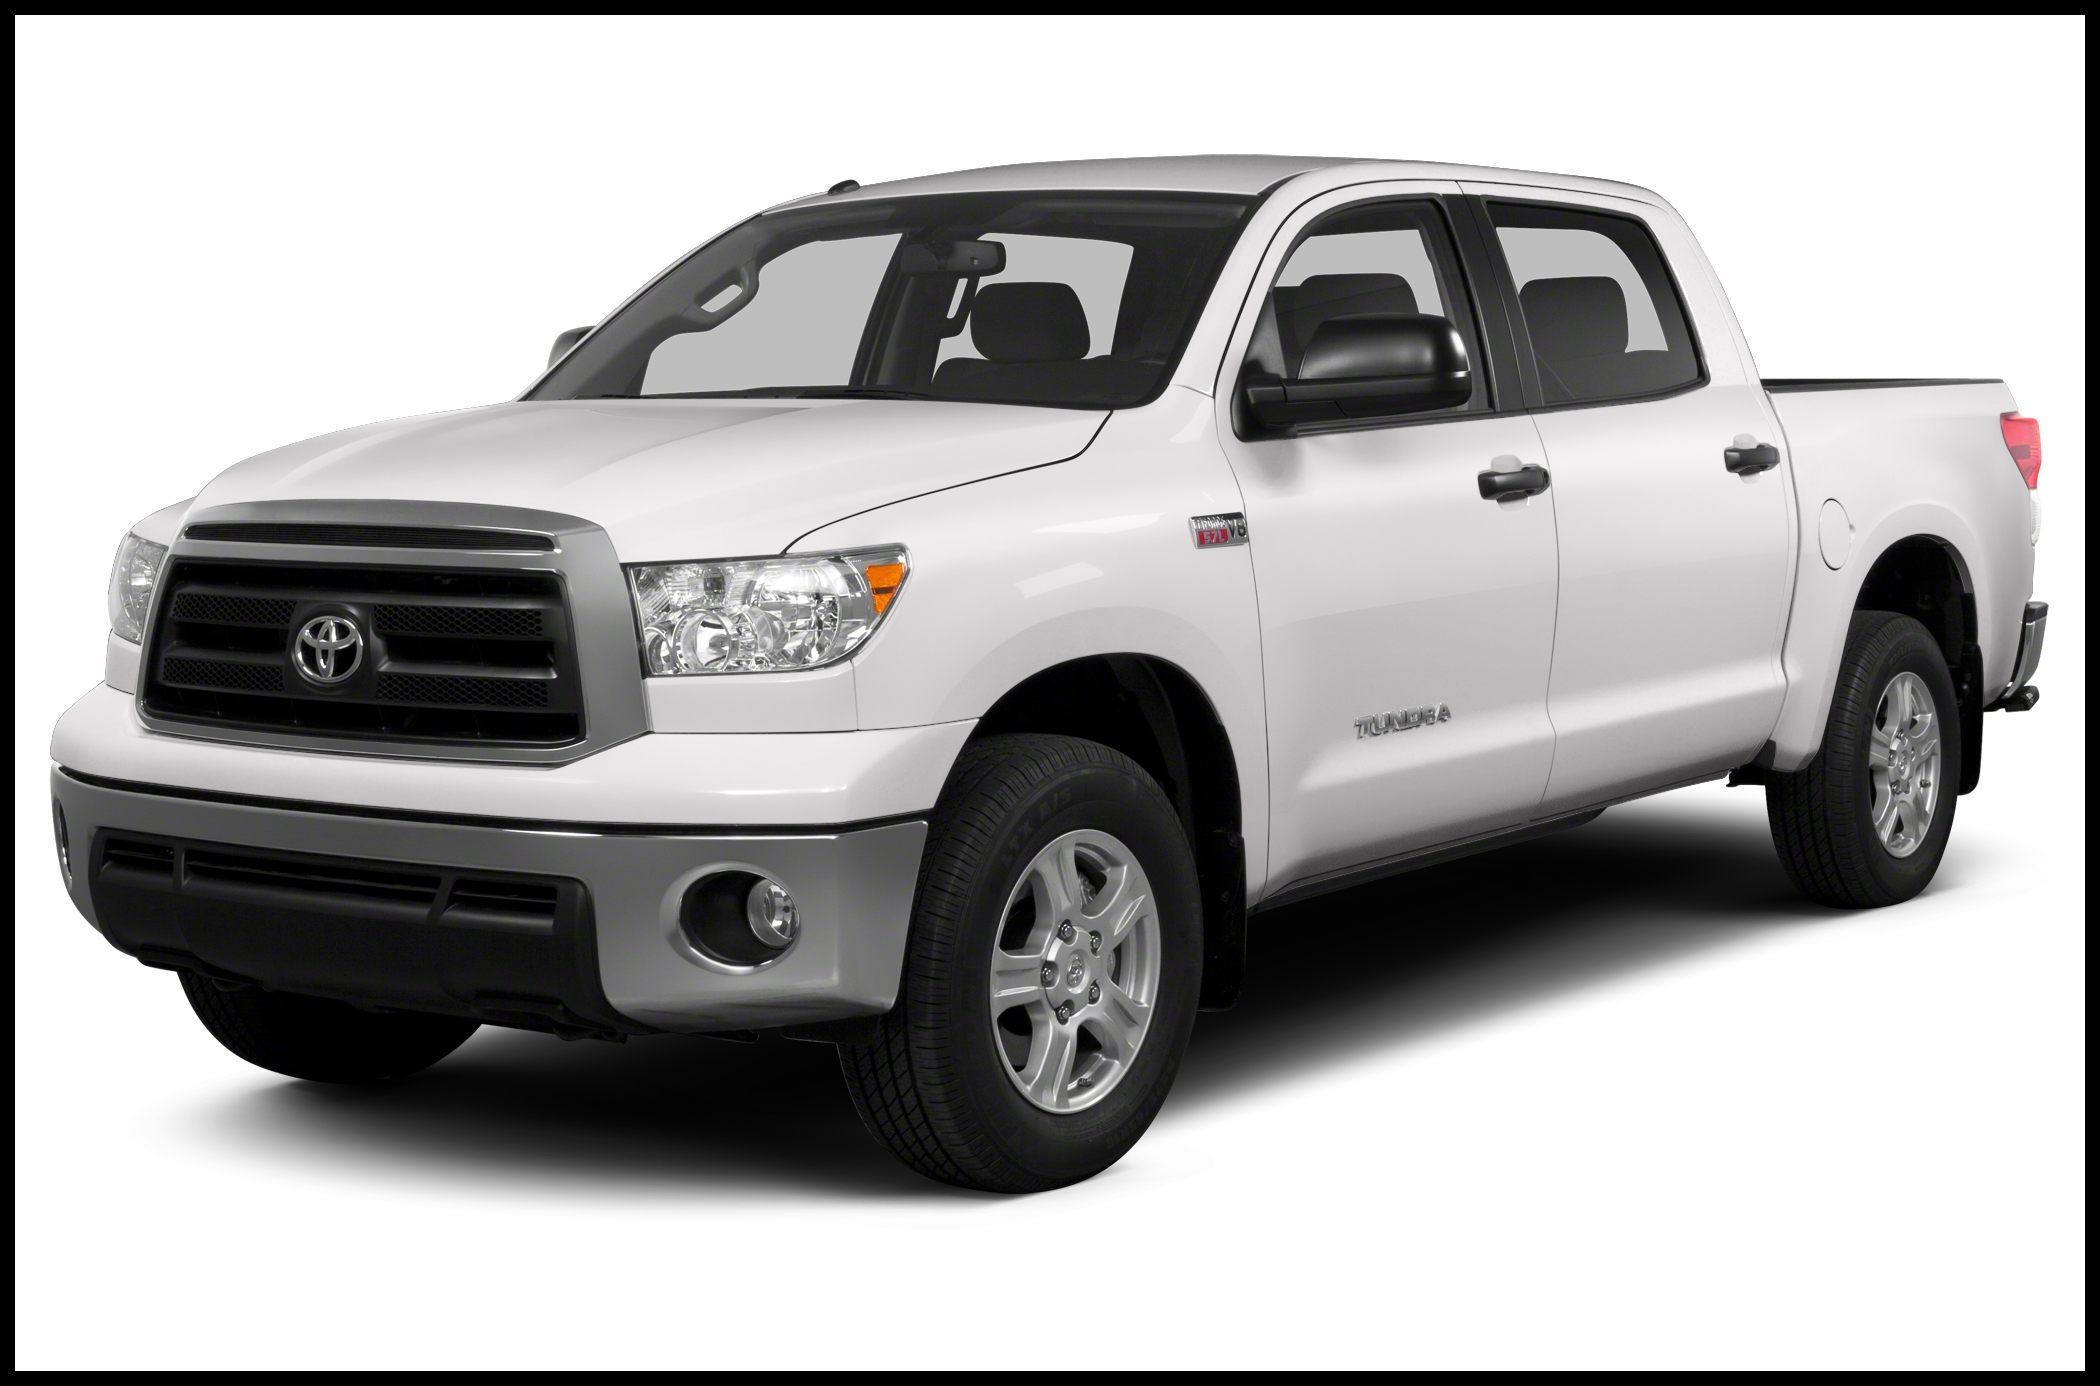 2013 Toyota Tundra Platinum 5 7L V8 4x4 Crew Max 5 6 ft box 145 7 in WB Pricing and Options